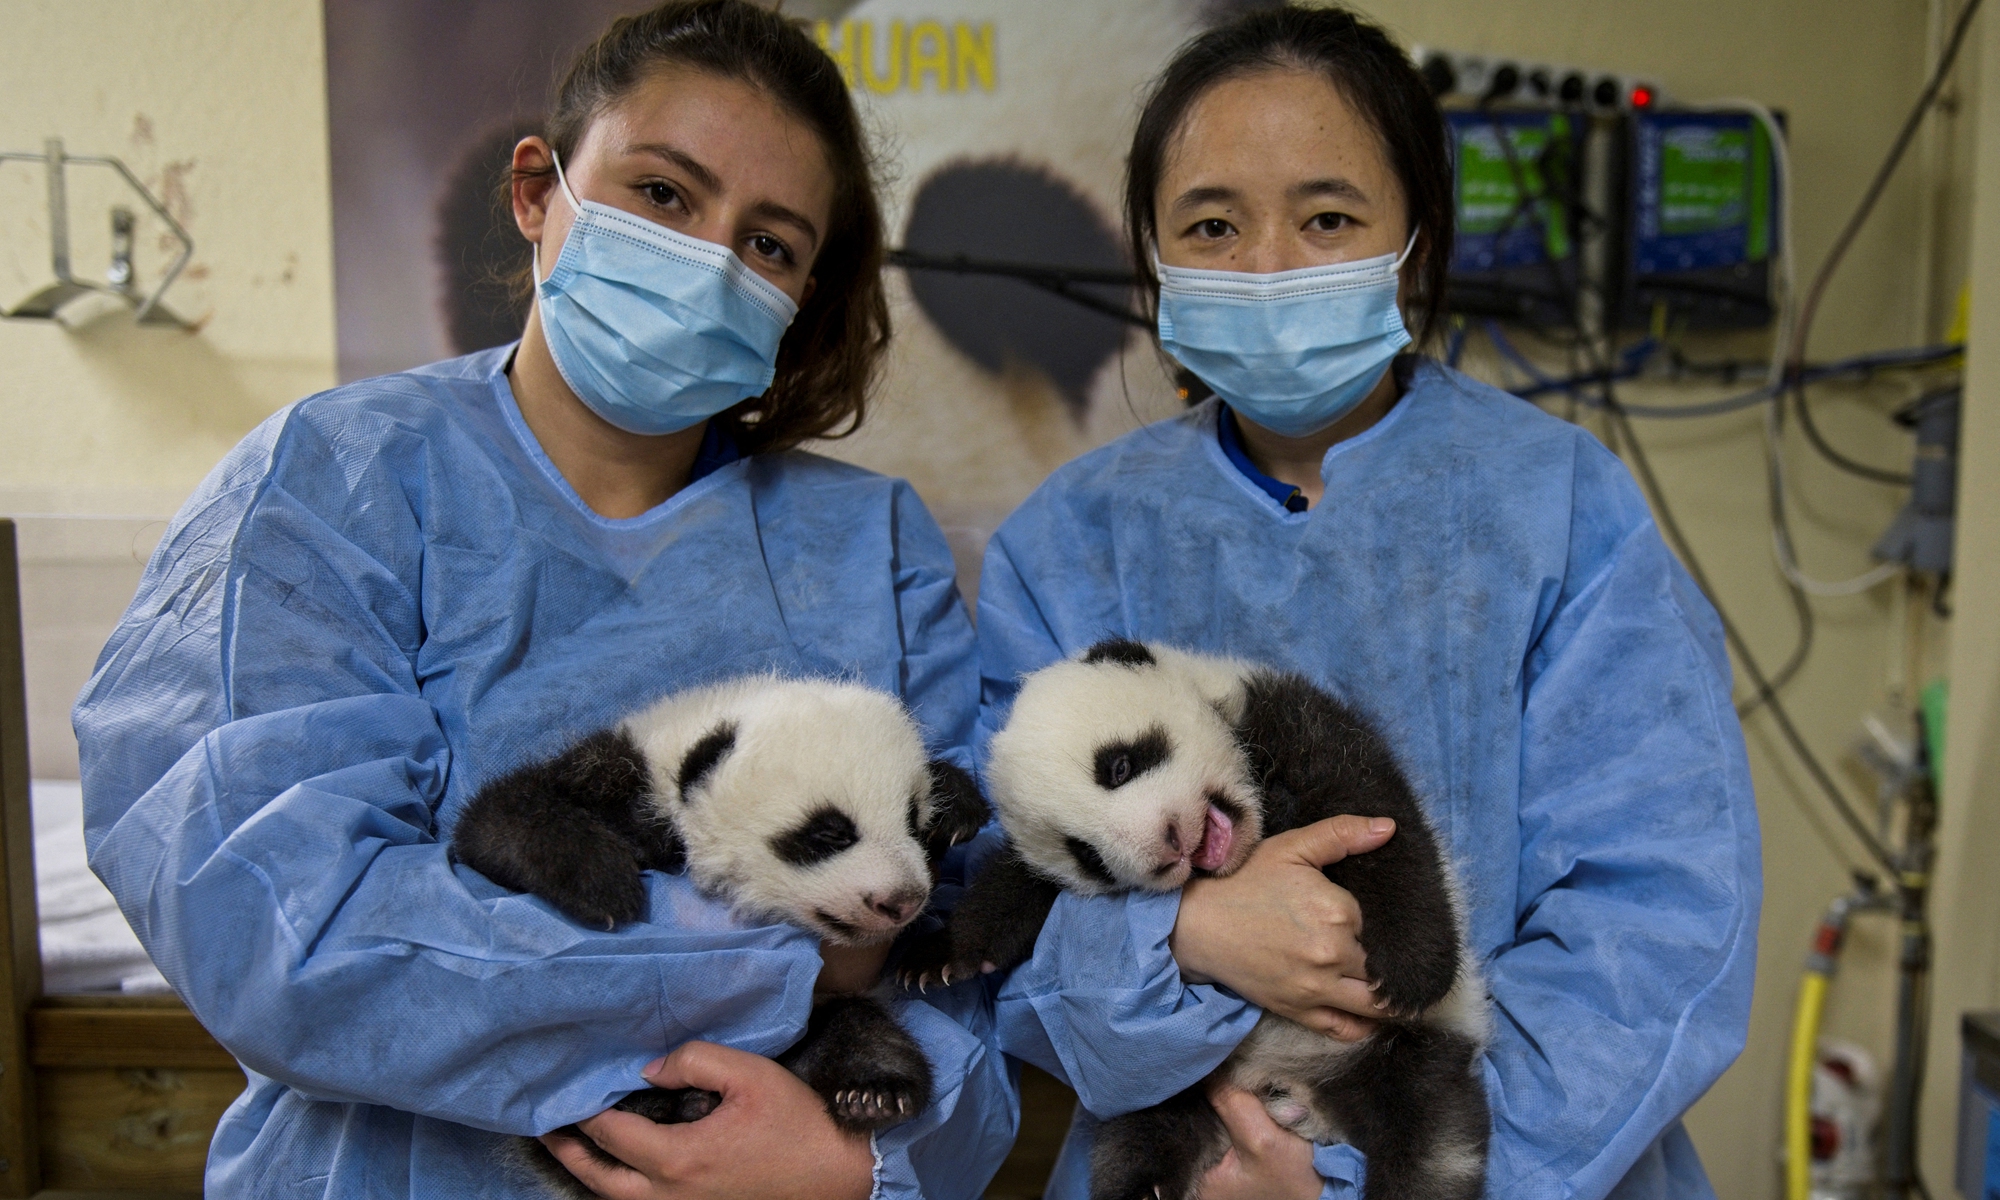 Giant panda-lending program widely endeared among animal and peace lovers  despite frail voice of politicization - Global Times